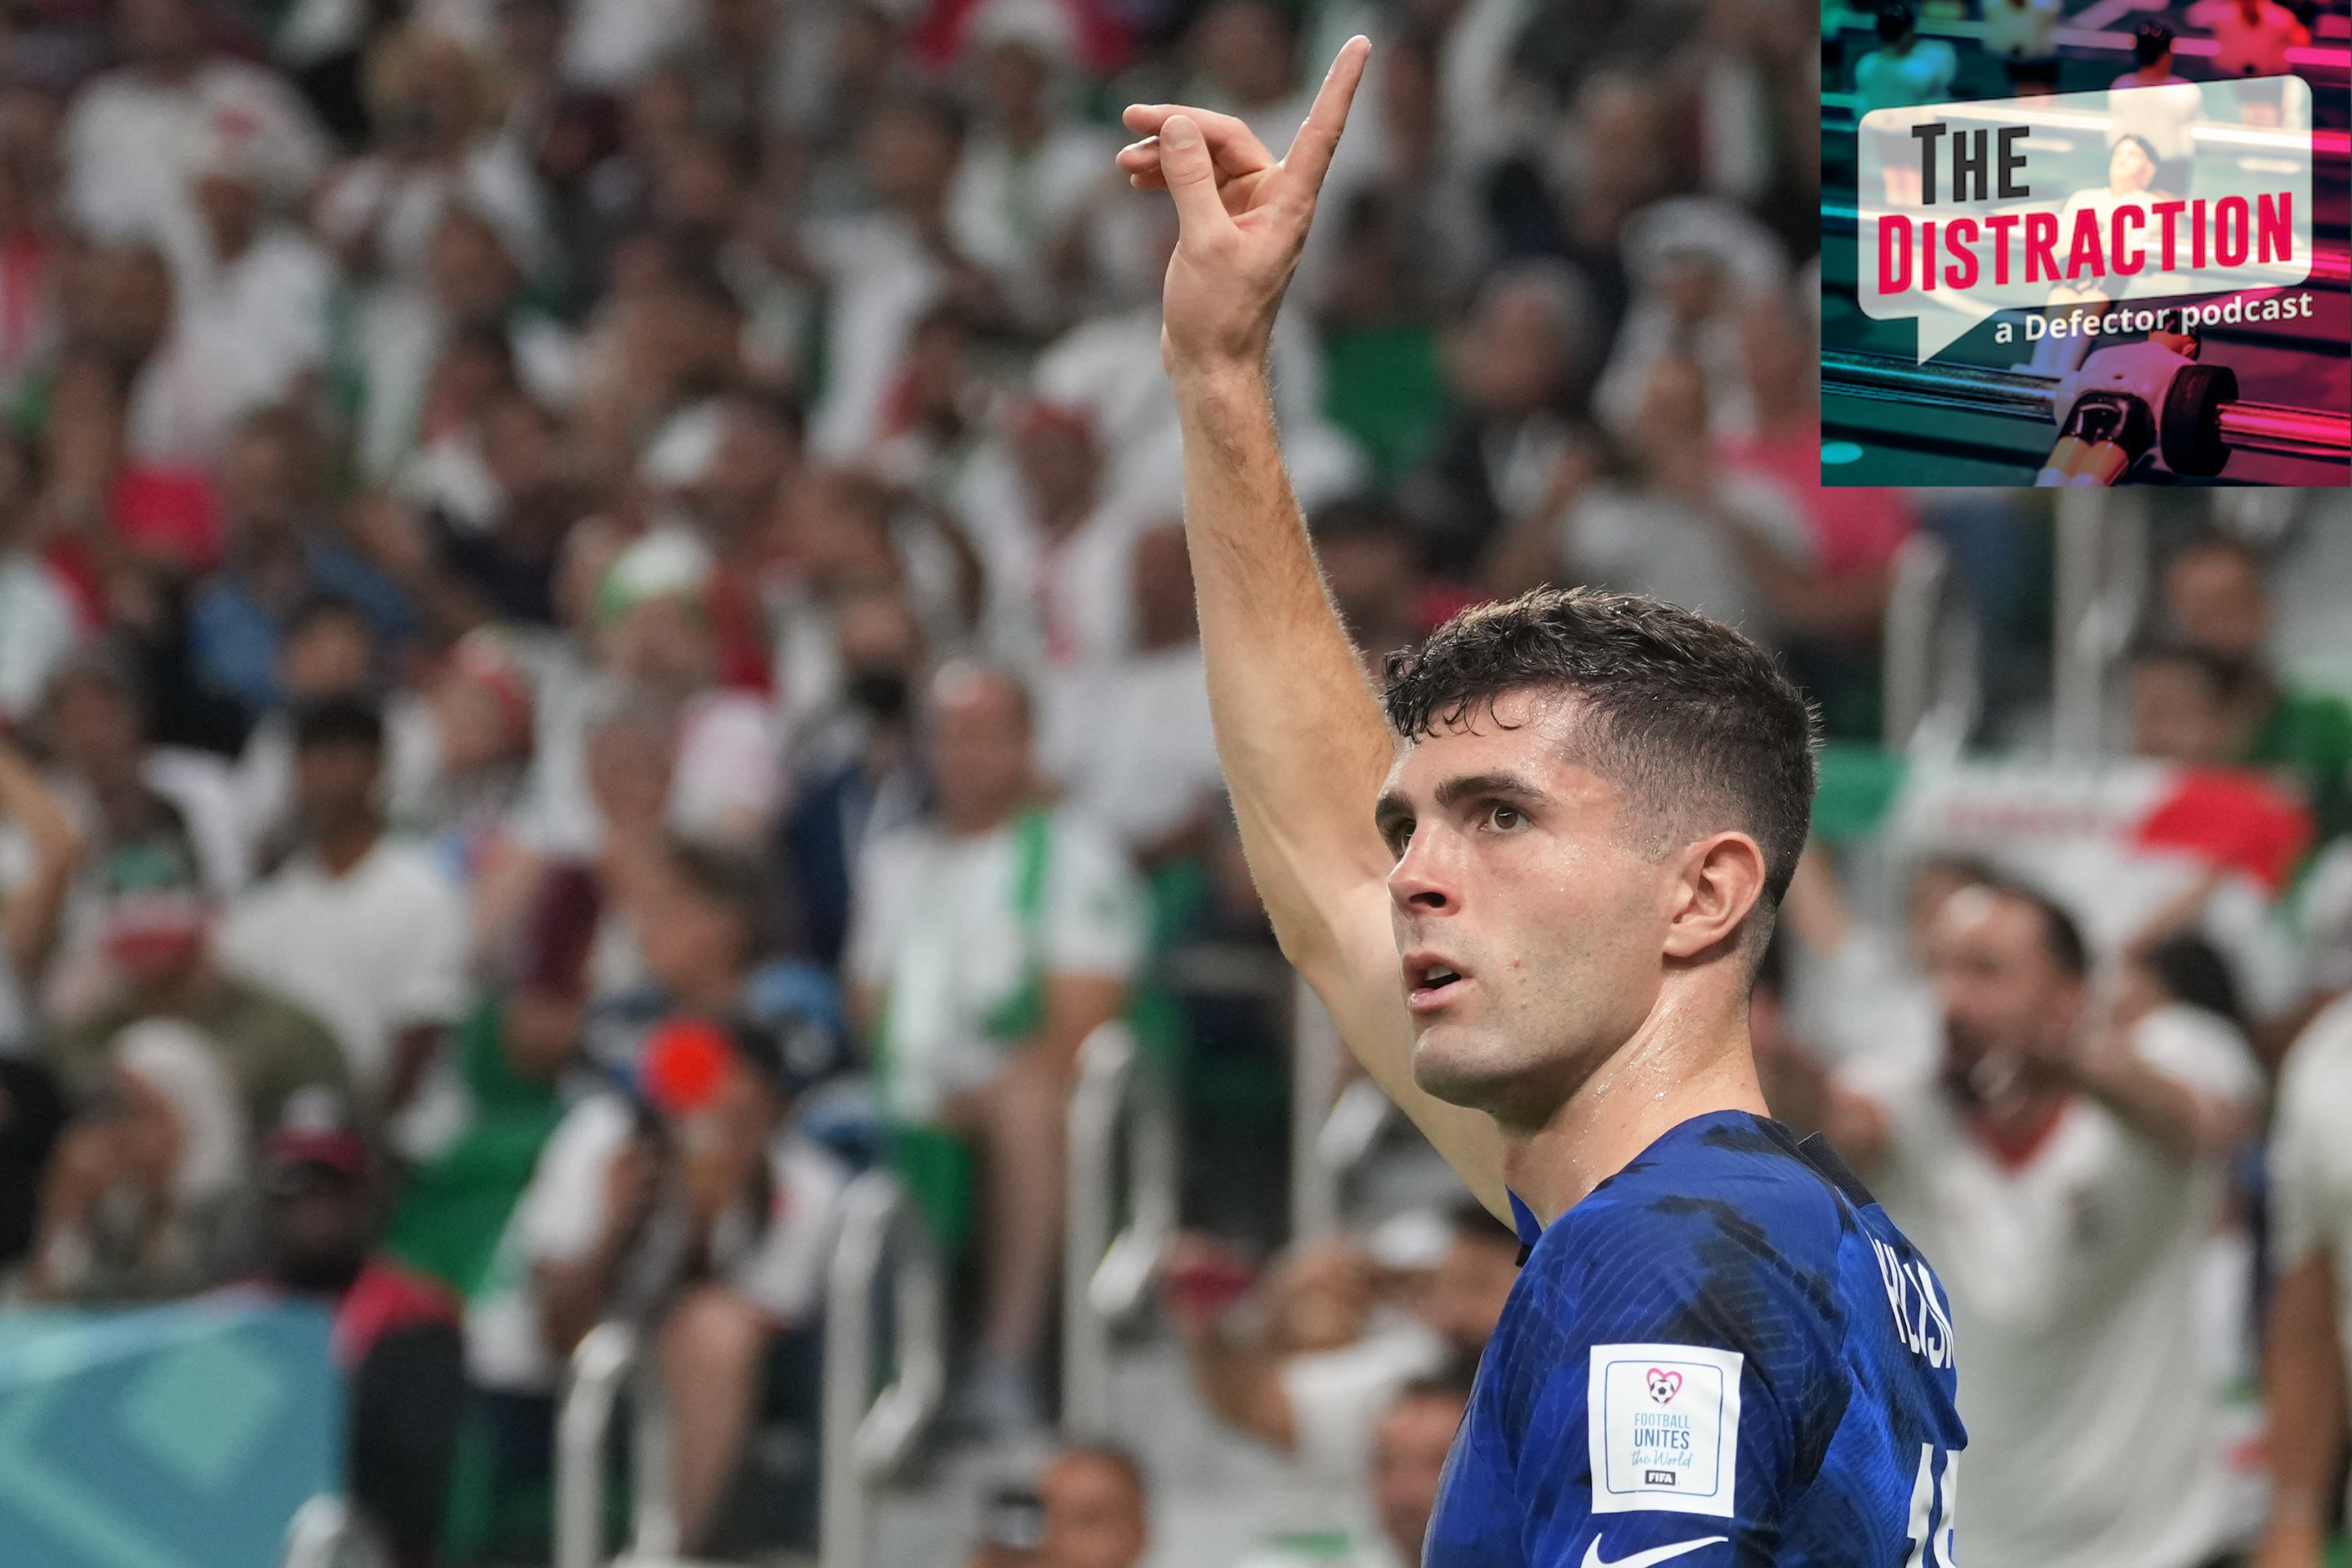 Christian Pulisic of the US Men's National Team prepares to take a corner kick in the team's win against Iran in the 2022 World Cup.